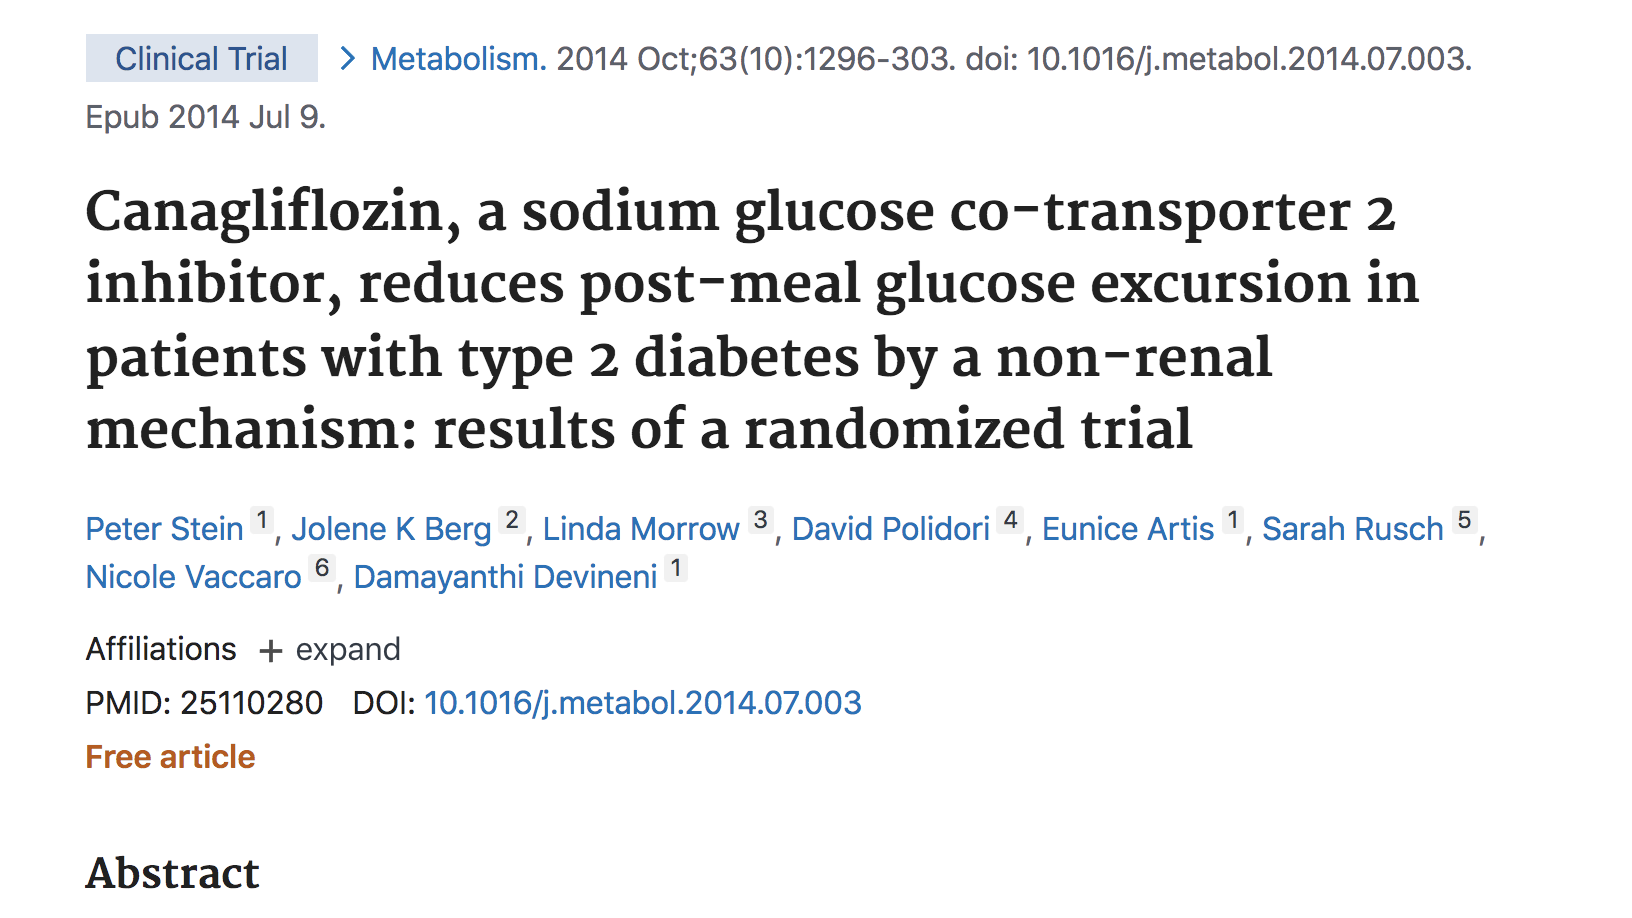 Canagliflozin, a sodium glucose co-transporter 2 inhibitor, reduces post-meal glucose excursion in patients with type 2 diabetes by a non-renal mechanism: results of a randomized trial thumbnail